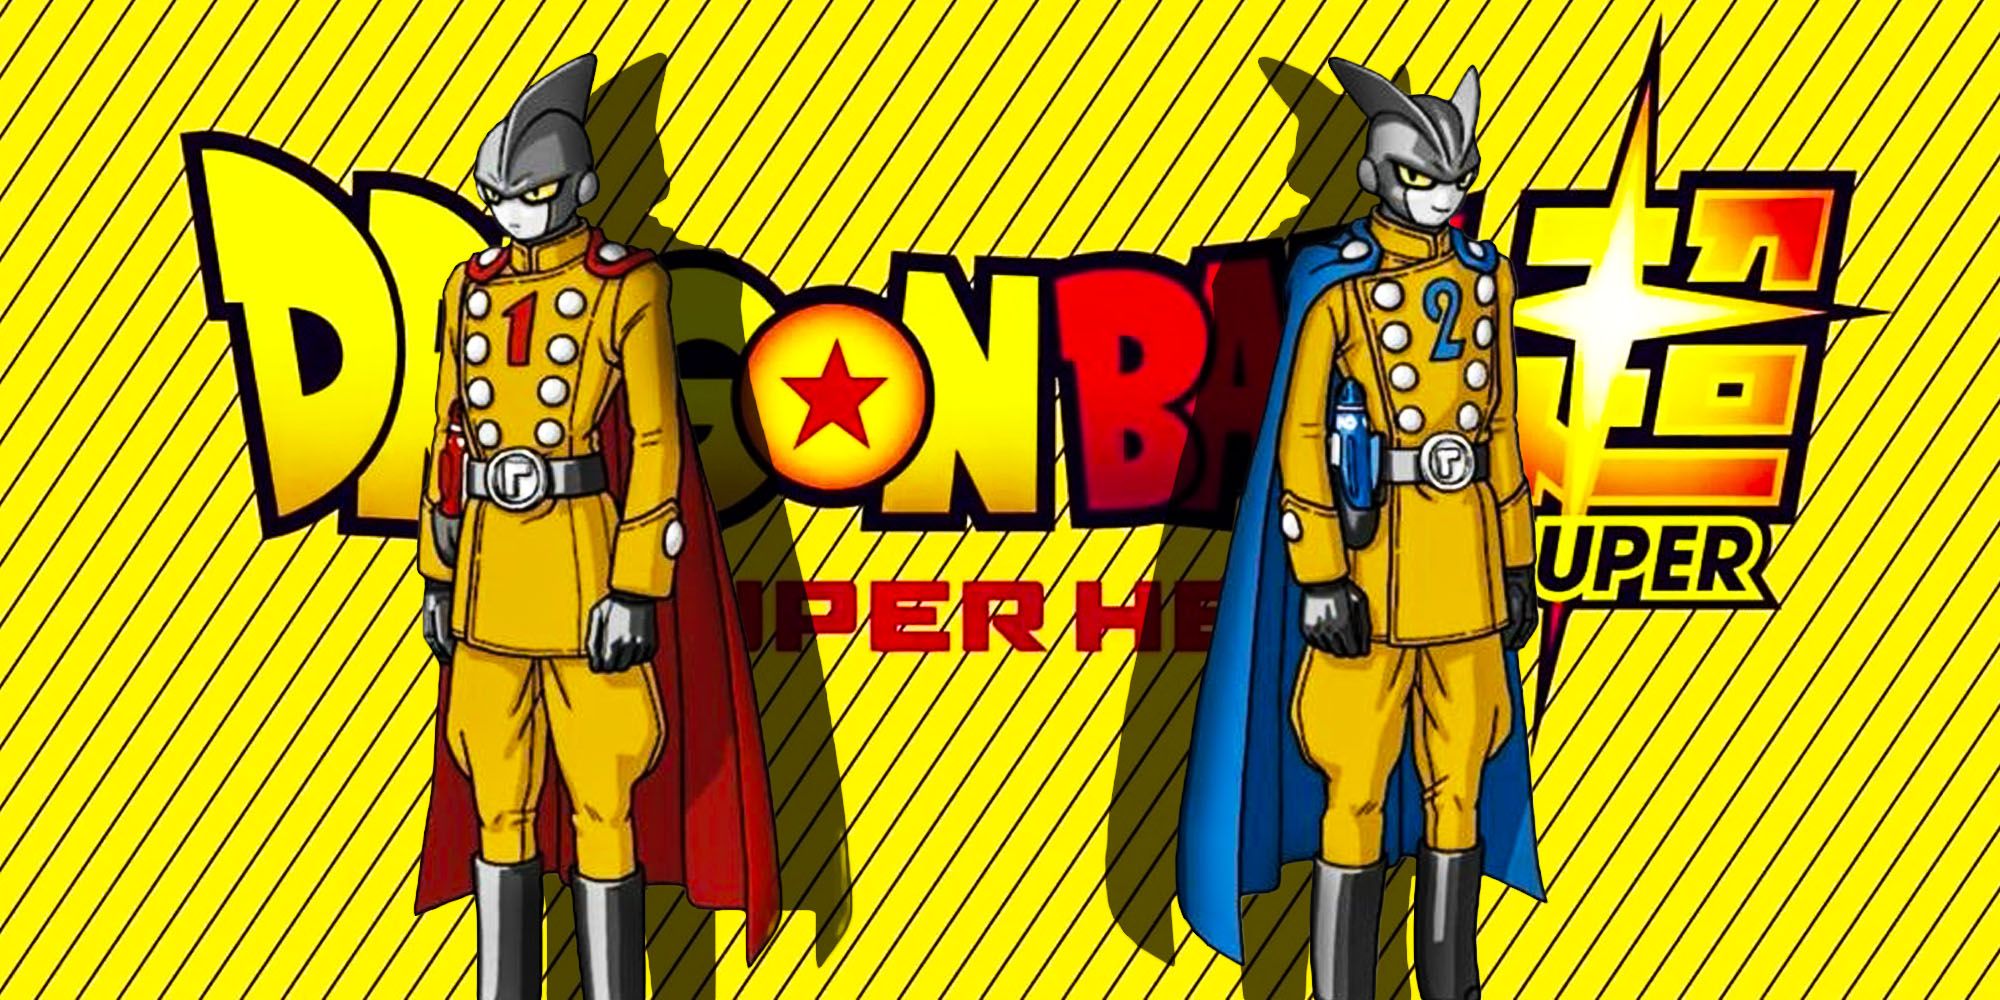 Dragon Ball Super: Super Hero characters exclusive first look